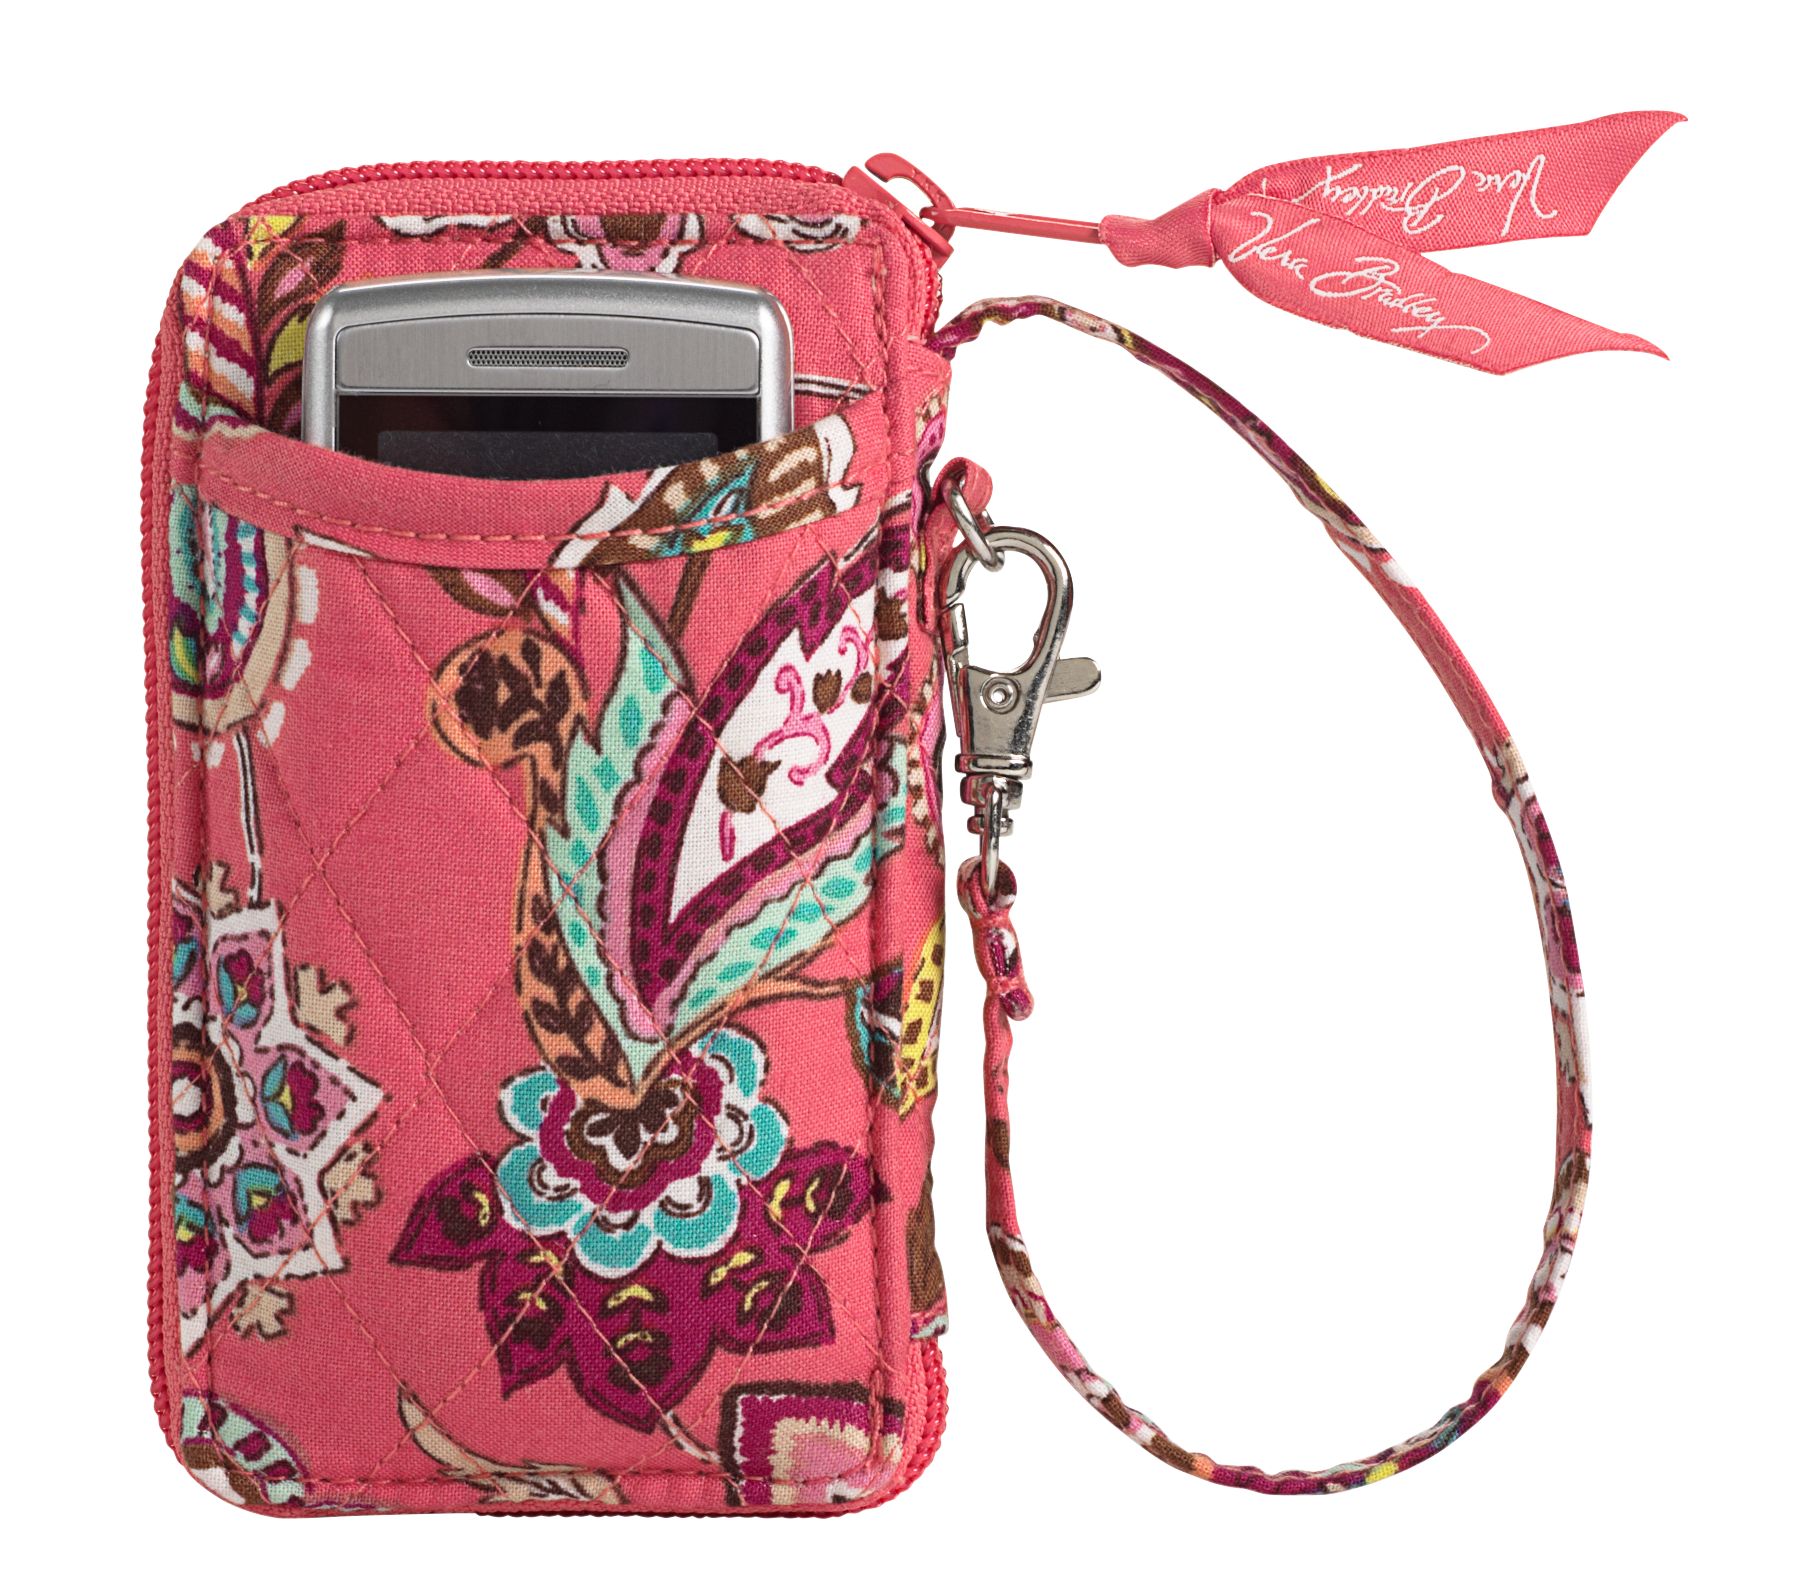 ... vera bradley for the best selection you can purchase a vera bradley